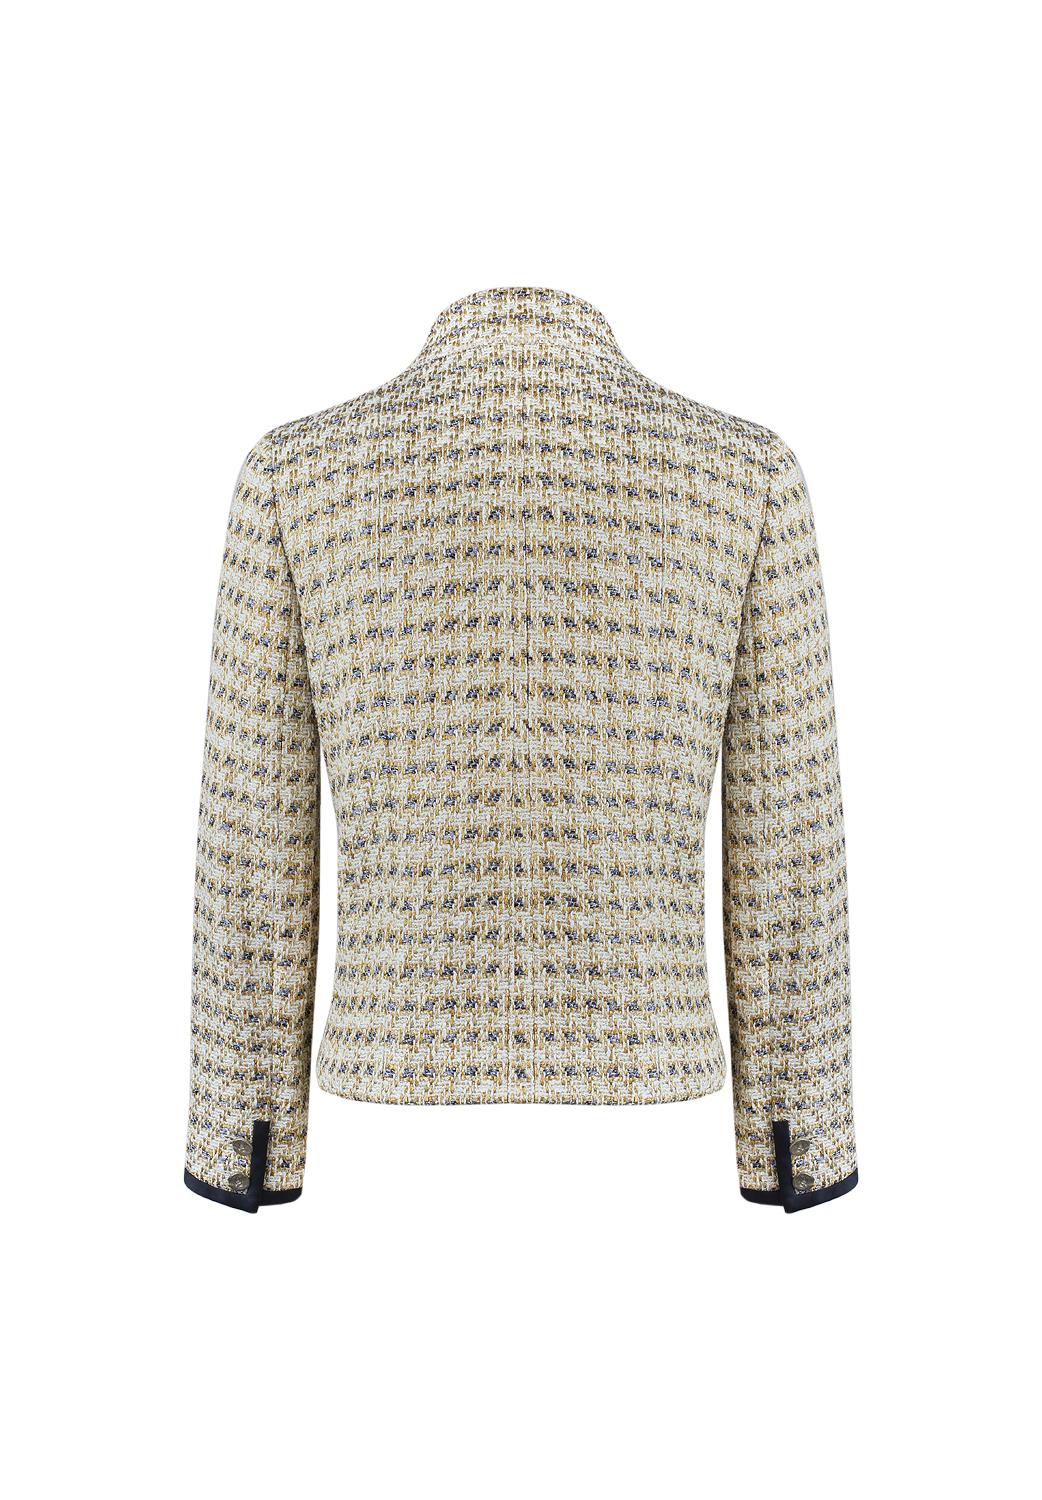 Chanel CC Buttons Metallic Tweed Jacket For Sale 2